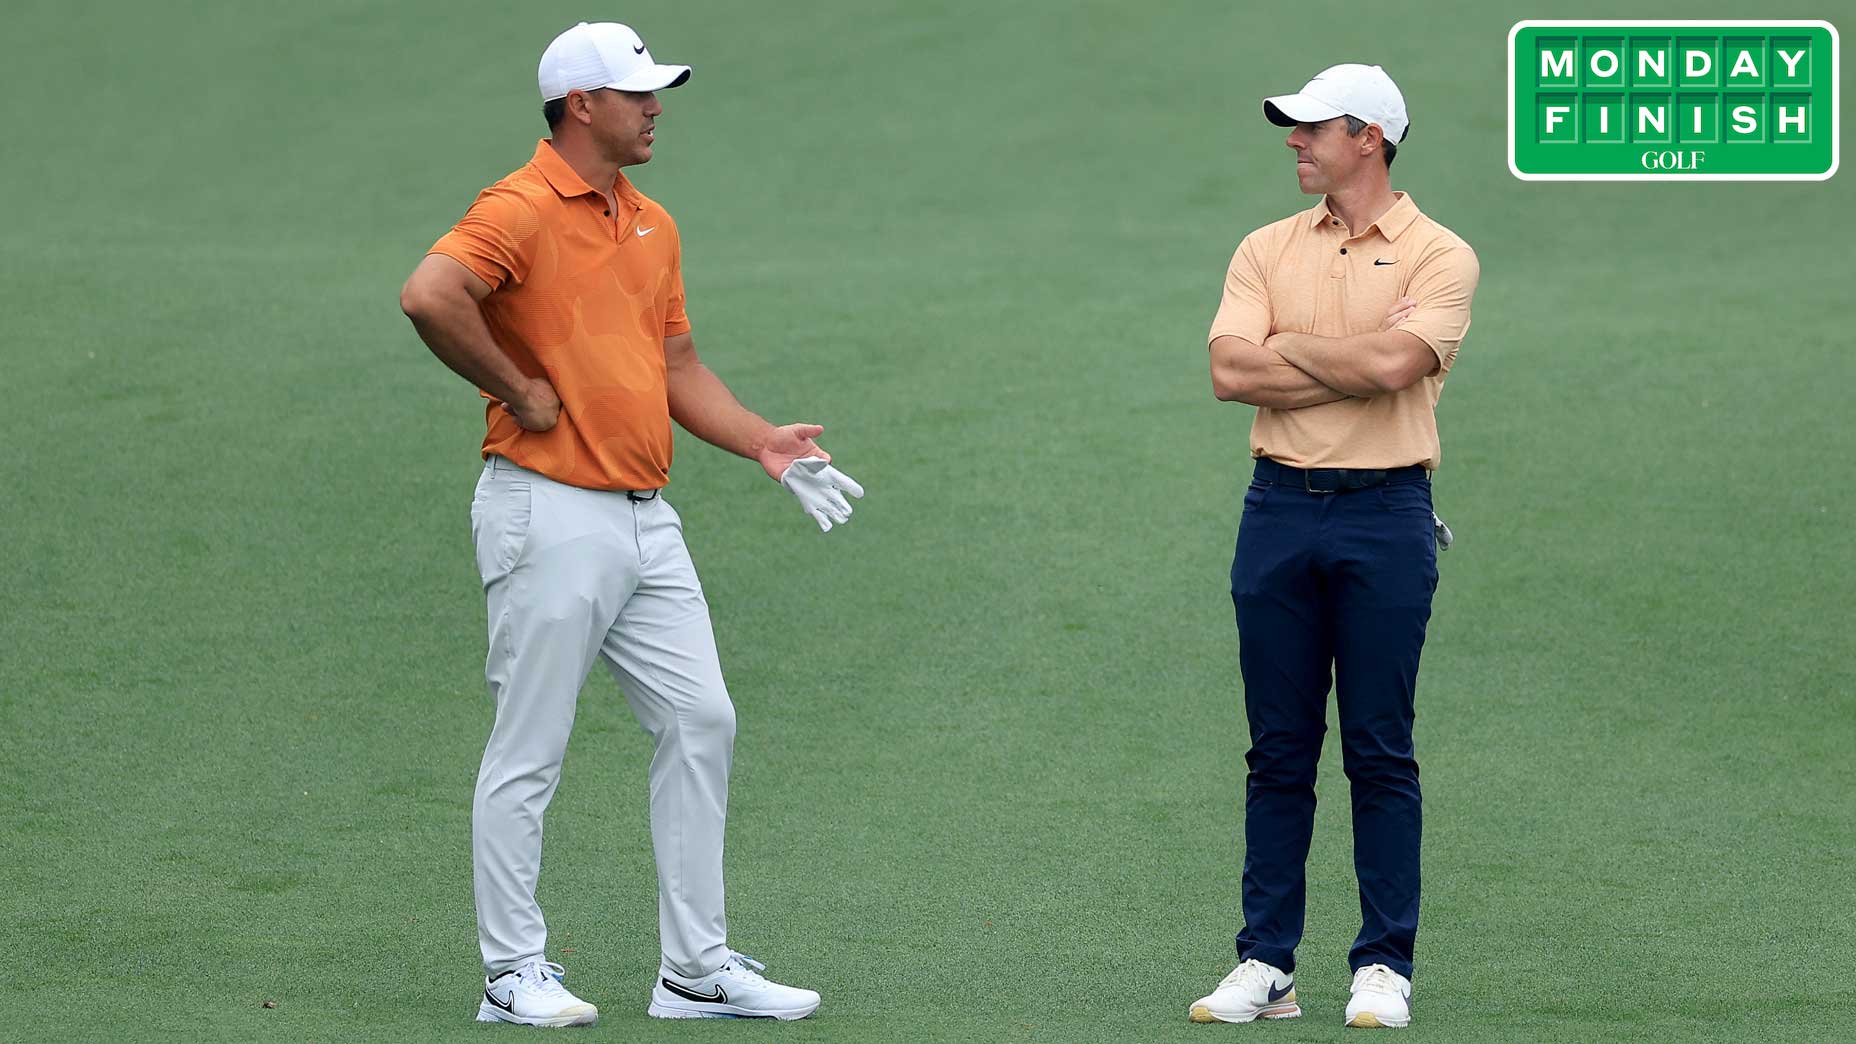 Brooks Koepka and Rory McIlroy were among this week's golf newsmakers.